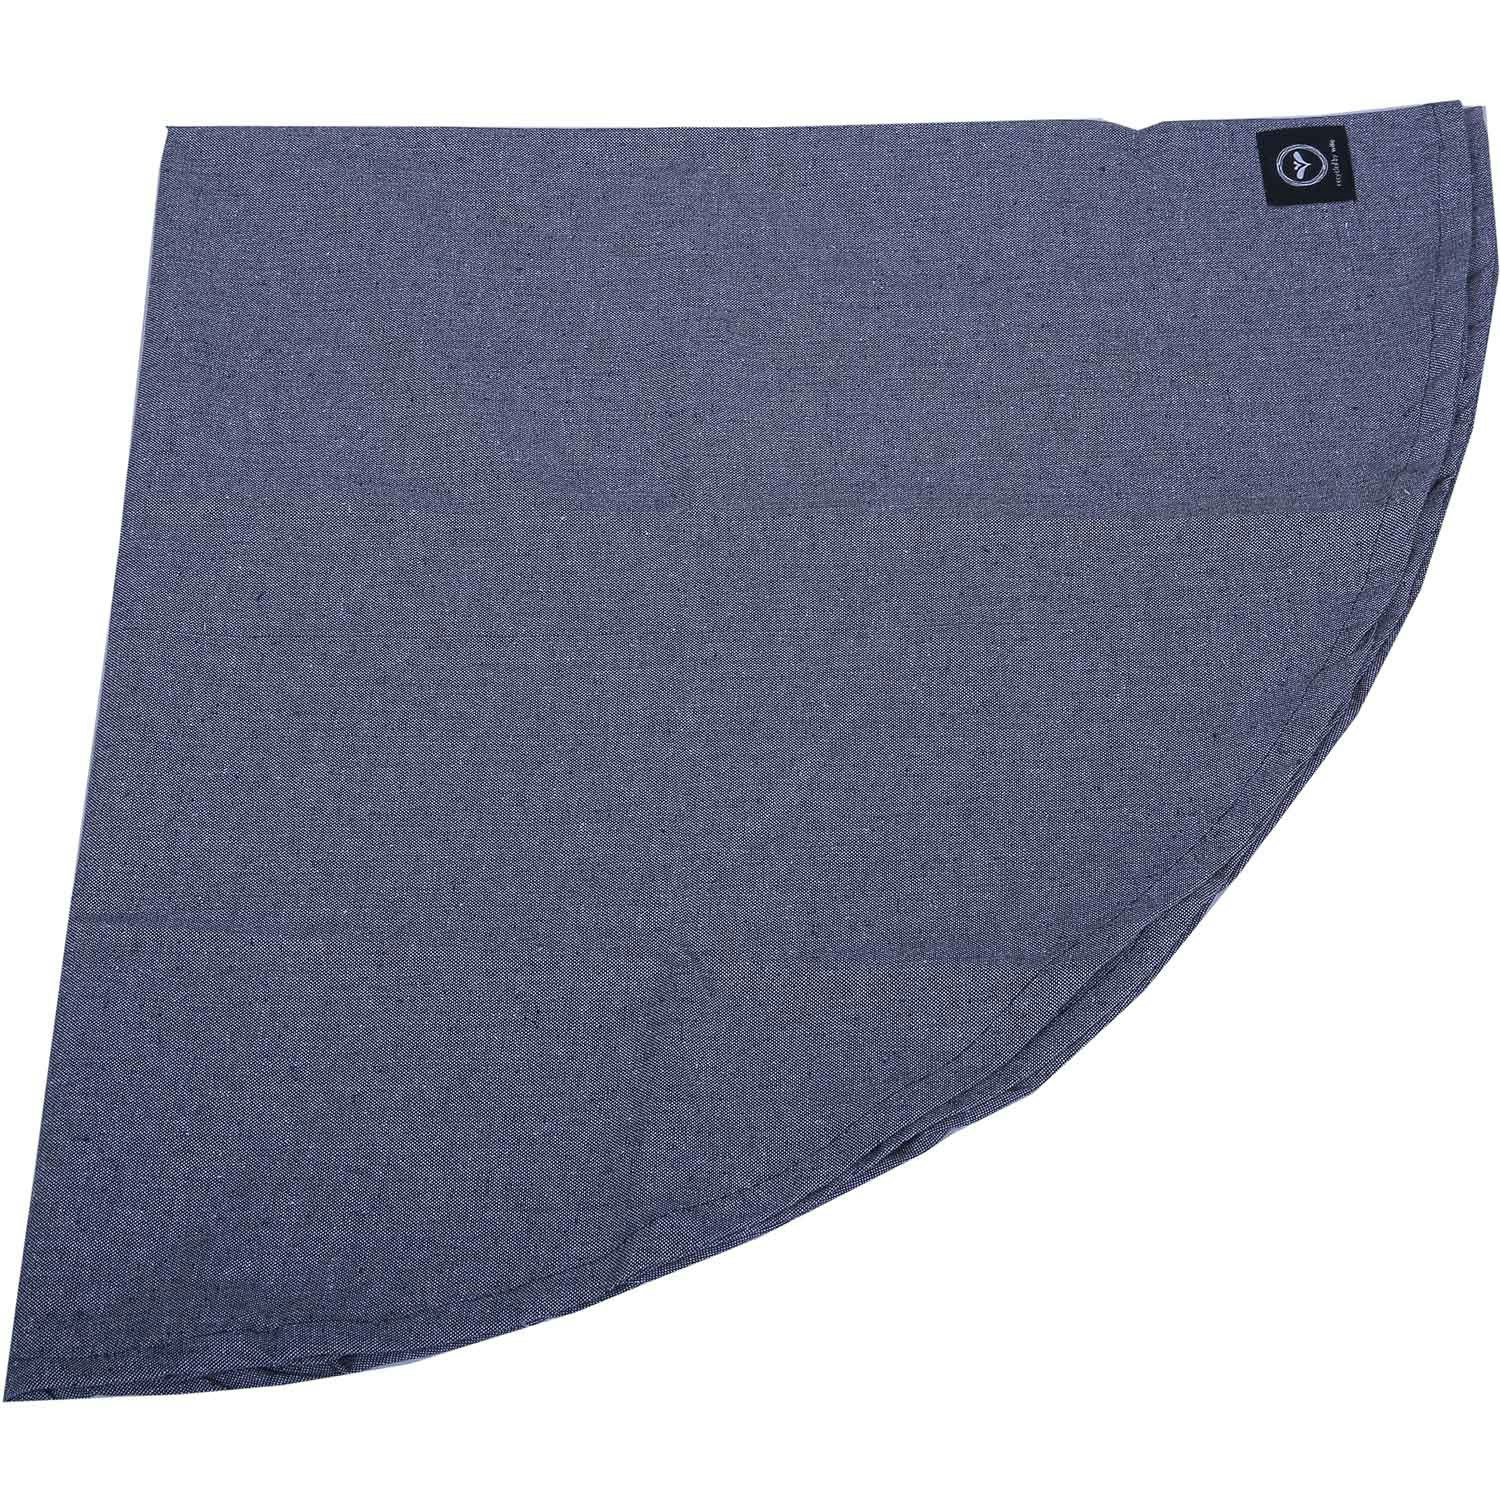 Recycled by Wille -Hedvig Dug Behandlet 160 cm Rund Chambray, Marineblå / Hvid